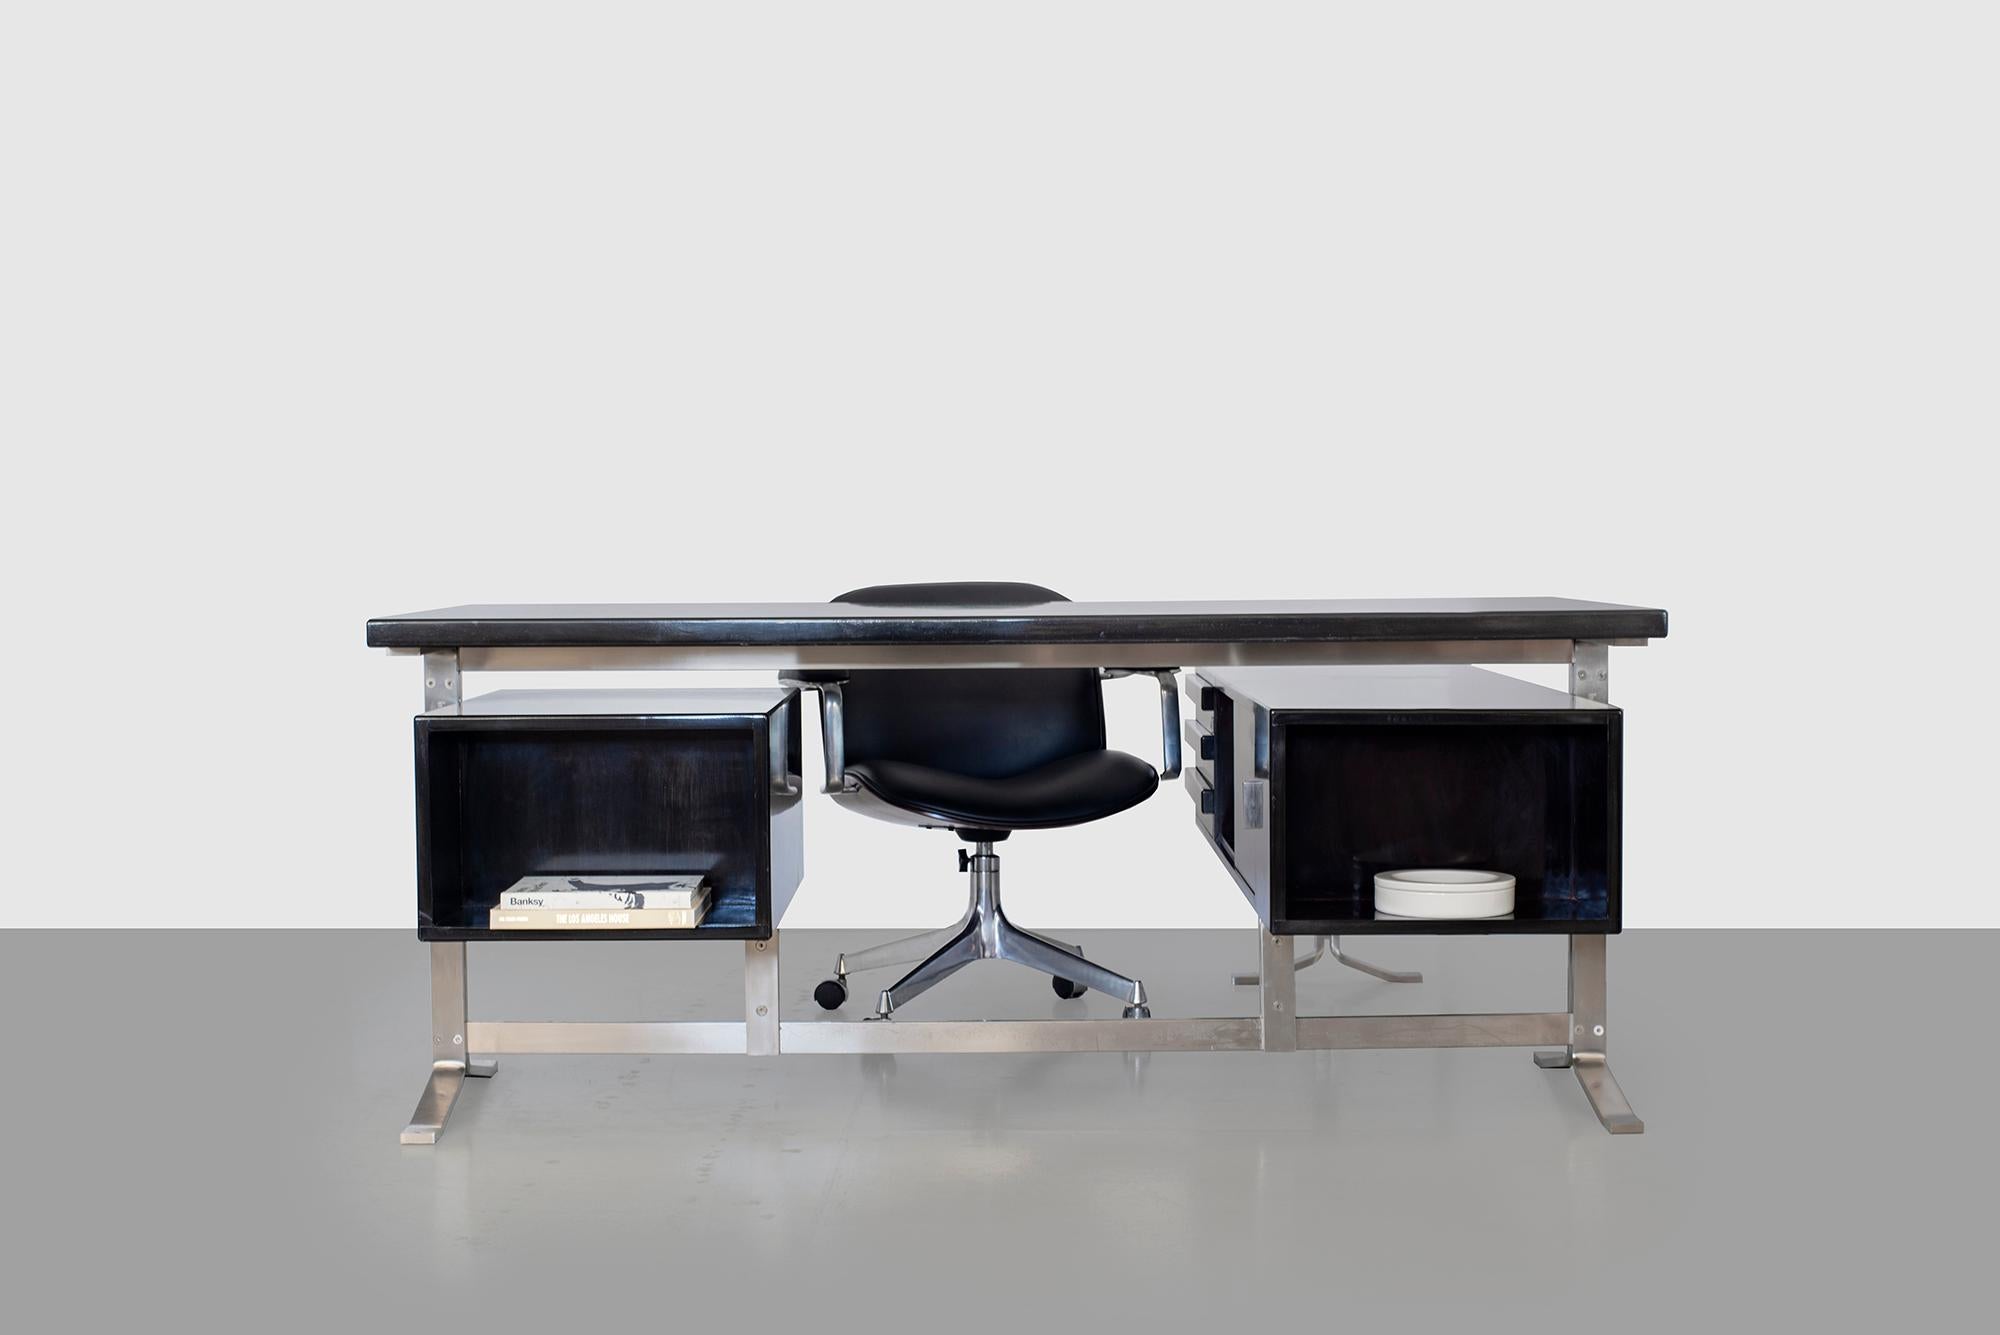 Handsome executive desk by Gianni Moscatelli for Forma Nova. Newly refinished in a dark ebony stain with polished finish. Desk surface rests on flat stainless steel legs with floating drawers on either side. Stamped Formanova on each leg.
Desk top